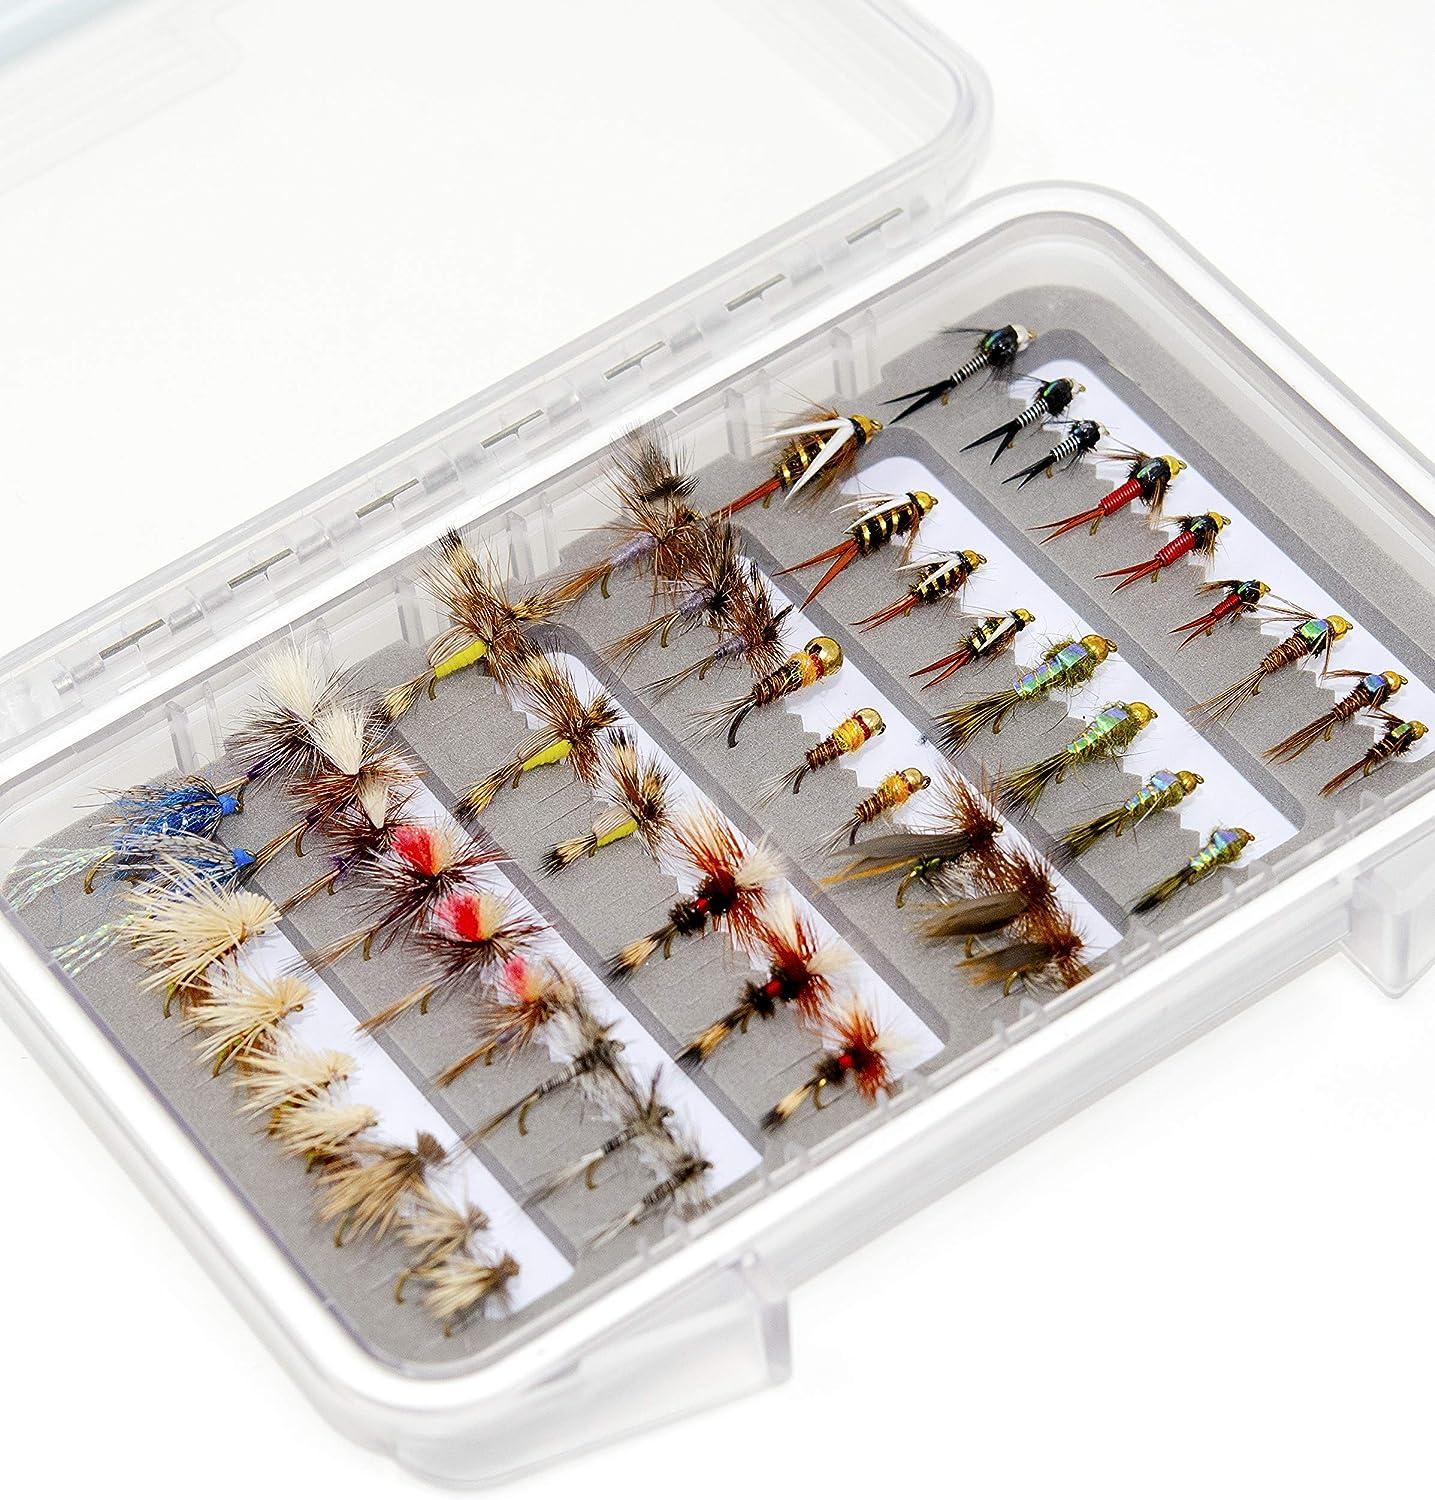 Outdoor Planet Go-to Dry Fly, Wet Fly, Nymph and Streamer Fly Lure  Assotment + Waterproof Fly Box for Trout Fly Fishing Flies